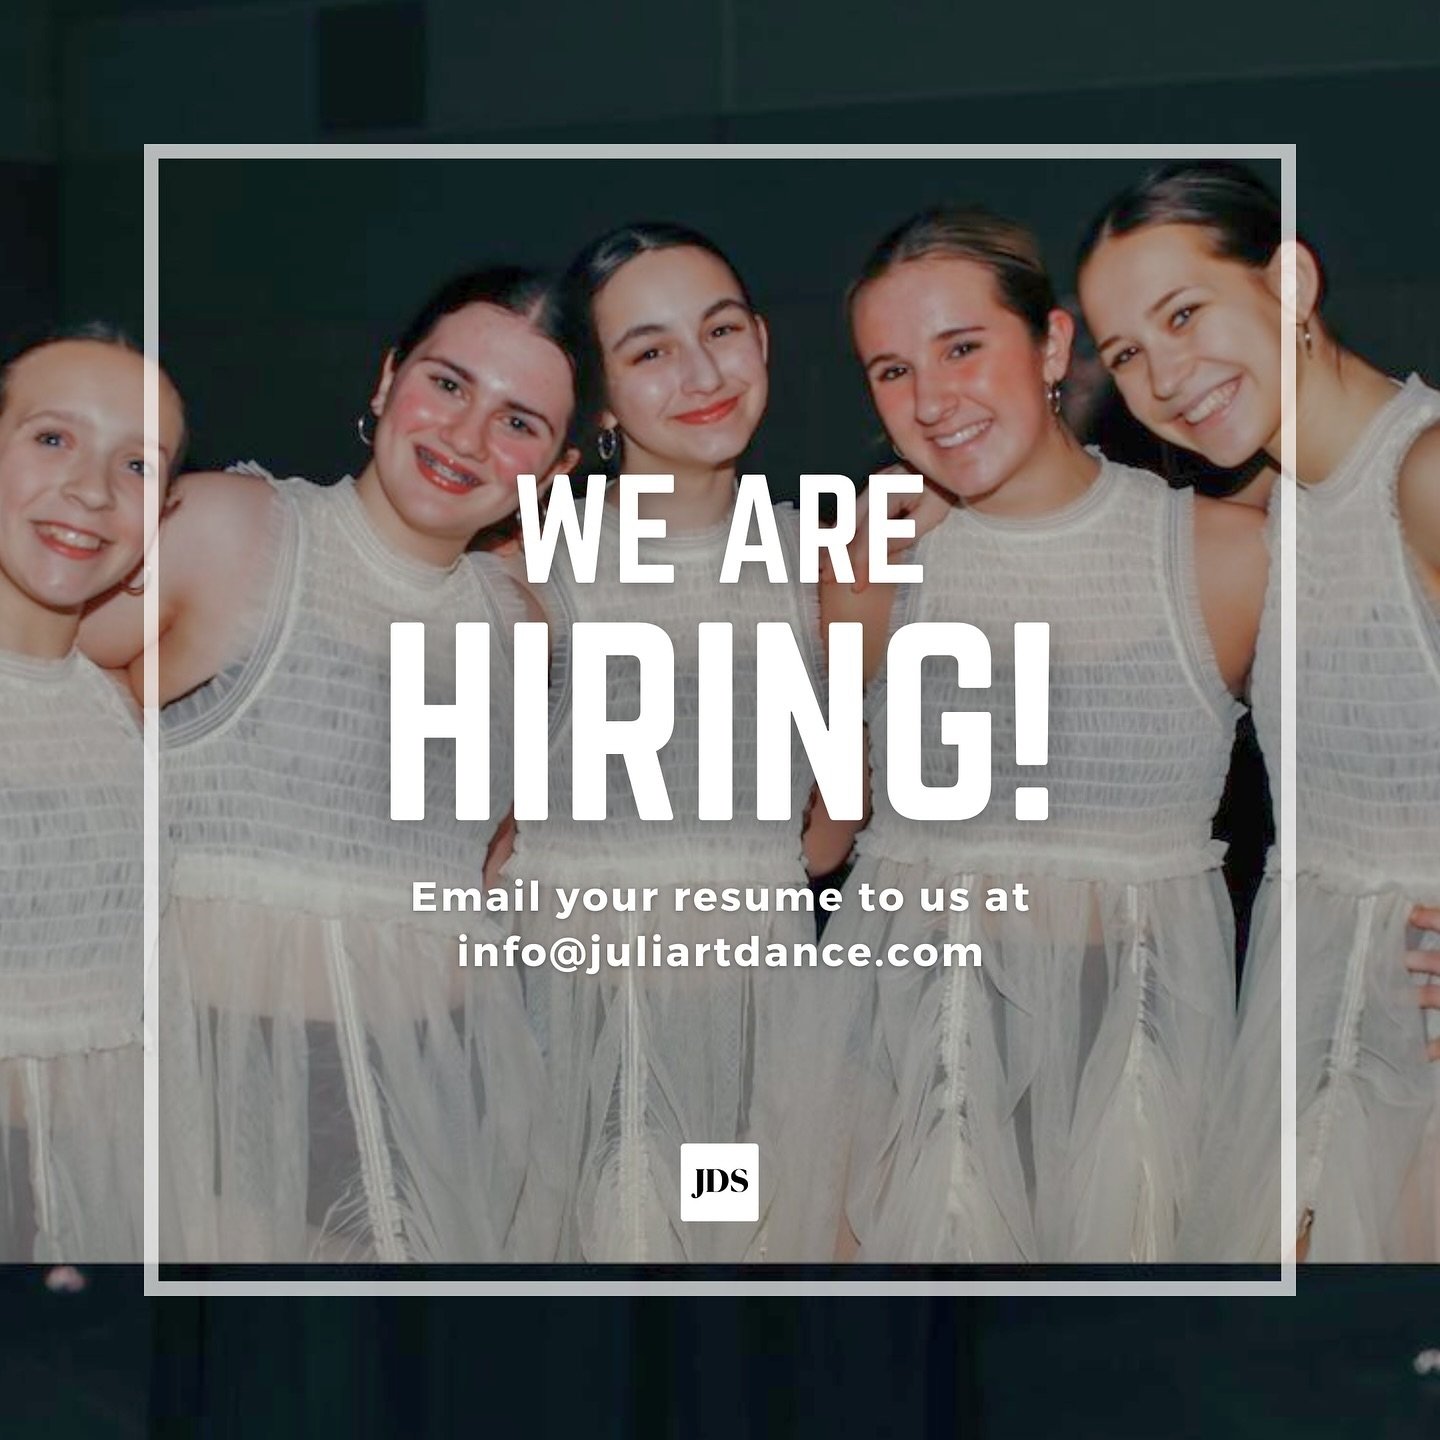 Interested in joining the Juliart fam!? Email us your resume at info@juliartdance.com 🩵
&bull;
&bull;
&bull;
#juliartdancestudio #juliartdance #hiring #hiringdanceteachers #hiringchoreographers #troymichigan #troydancestudio #competitivedance #dance